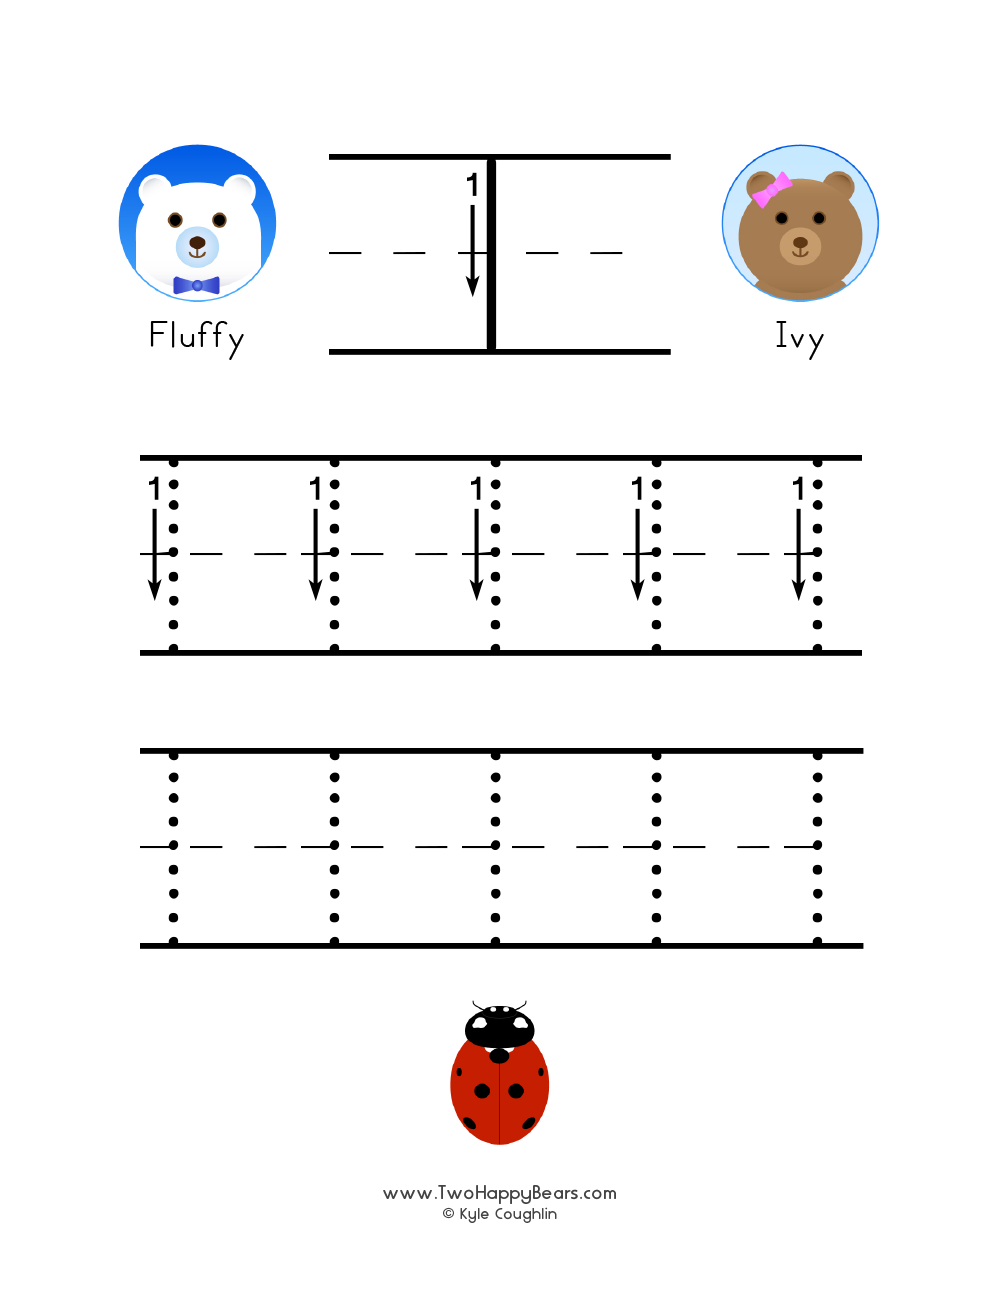 Lowercase letter L worksheet for tracing